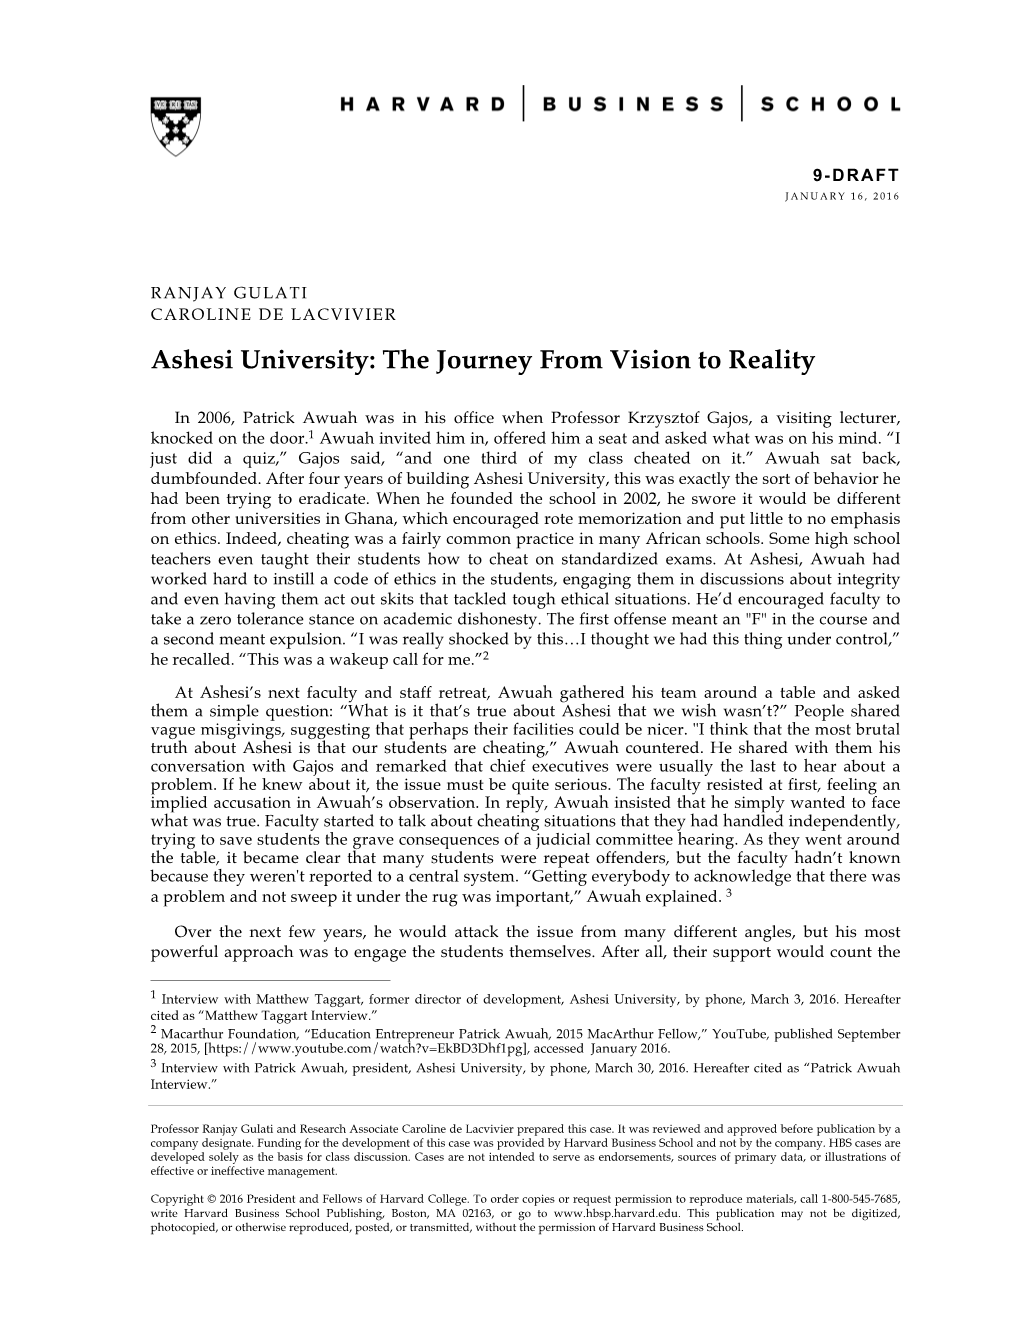 Ashesi University: the Journey from Vision to Reality